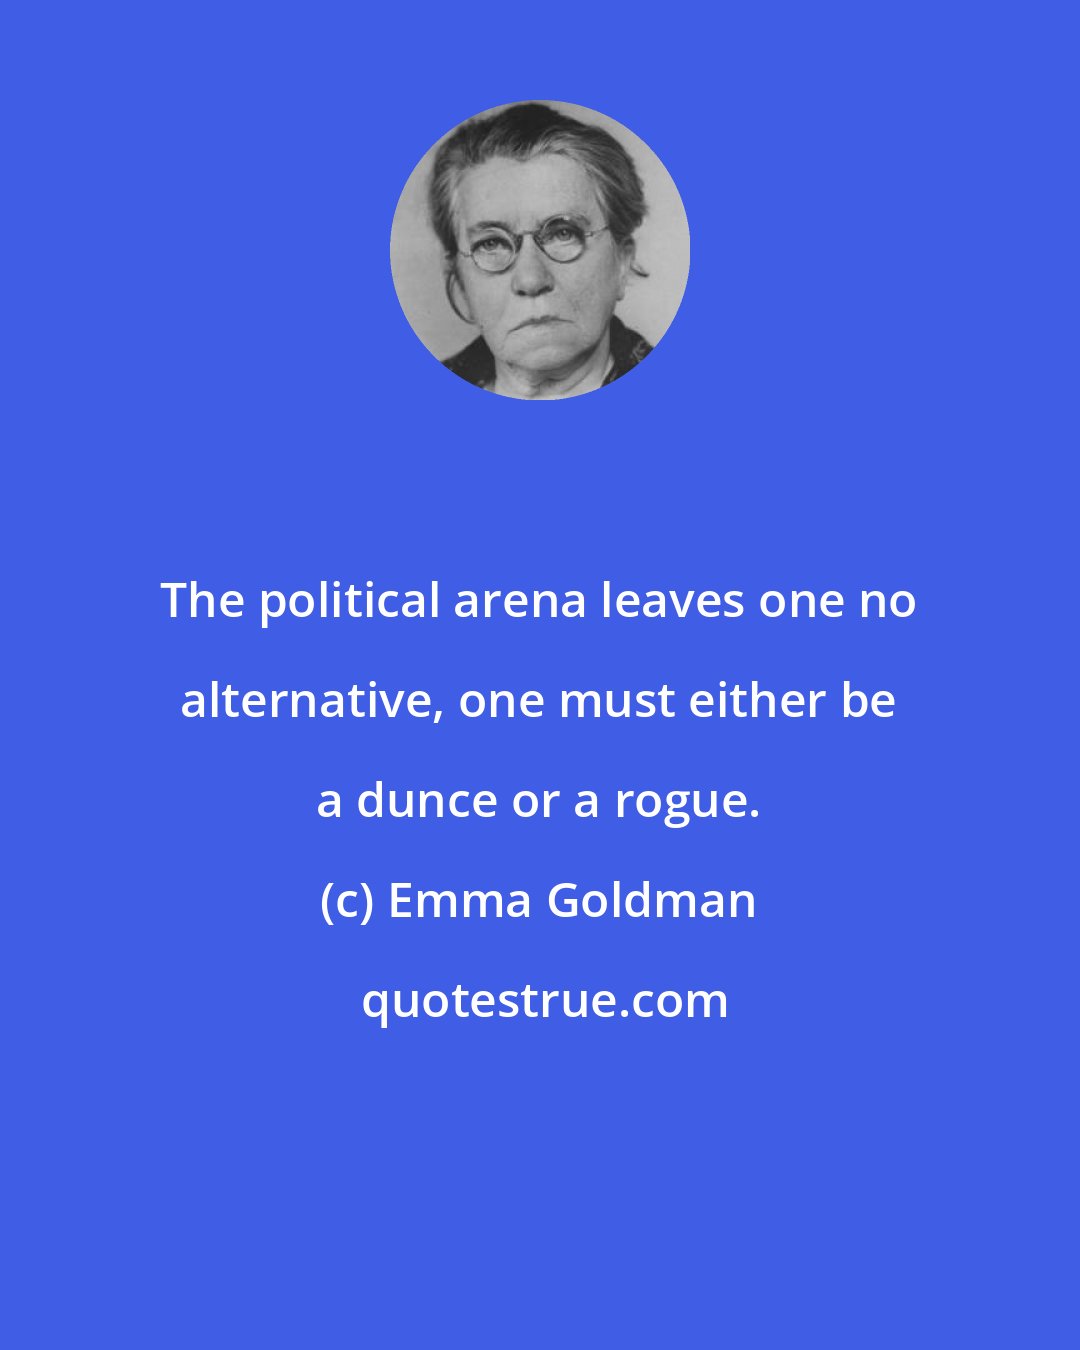 Emma Goldman: The political arena leaves one no alternative, one must either be a dunce or a rogue.